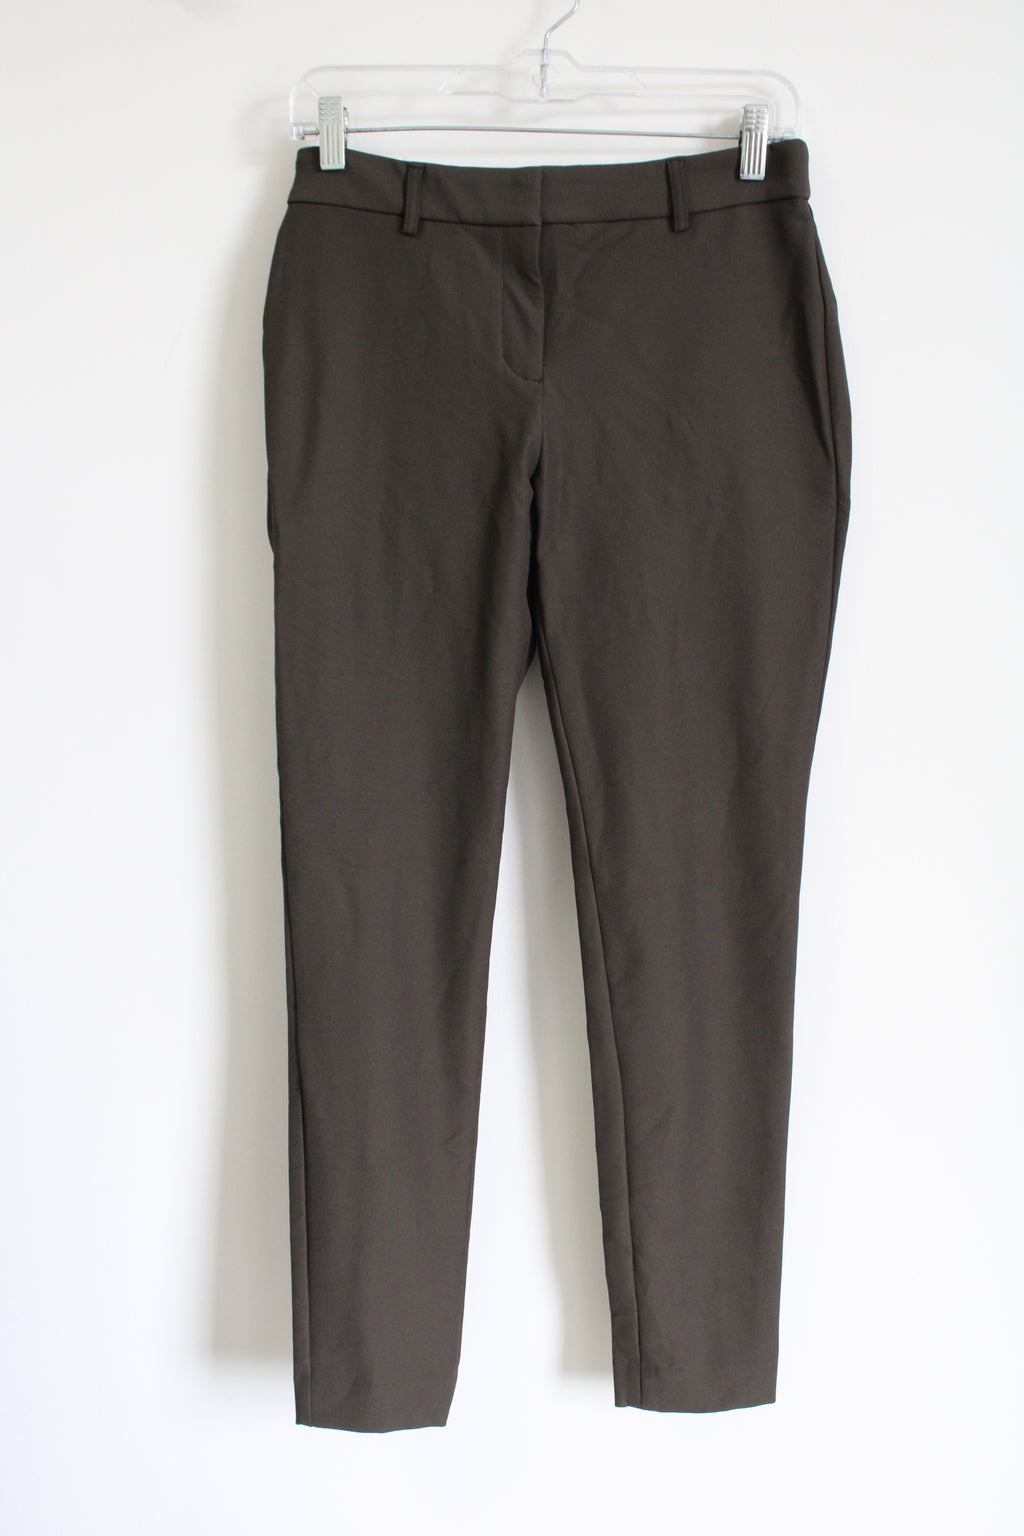 Express Olive Green Stretch Slim Fit Pants | 4